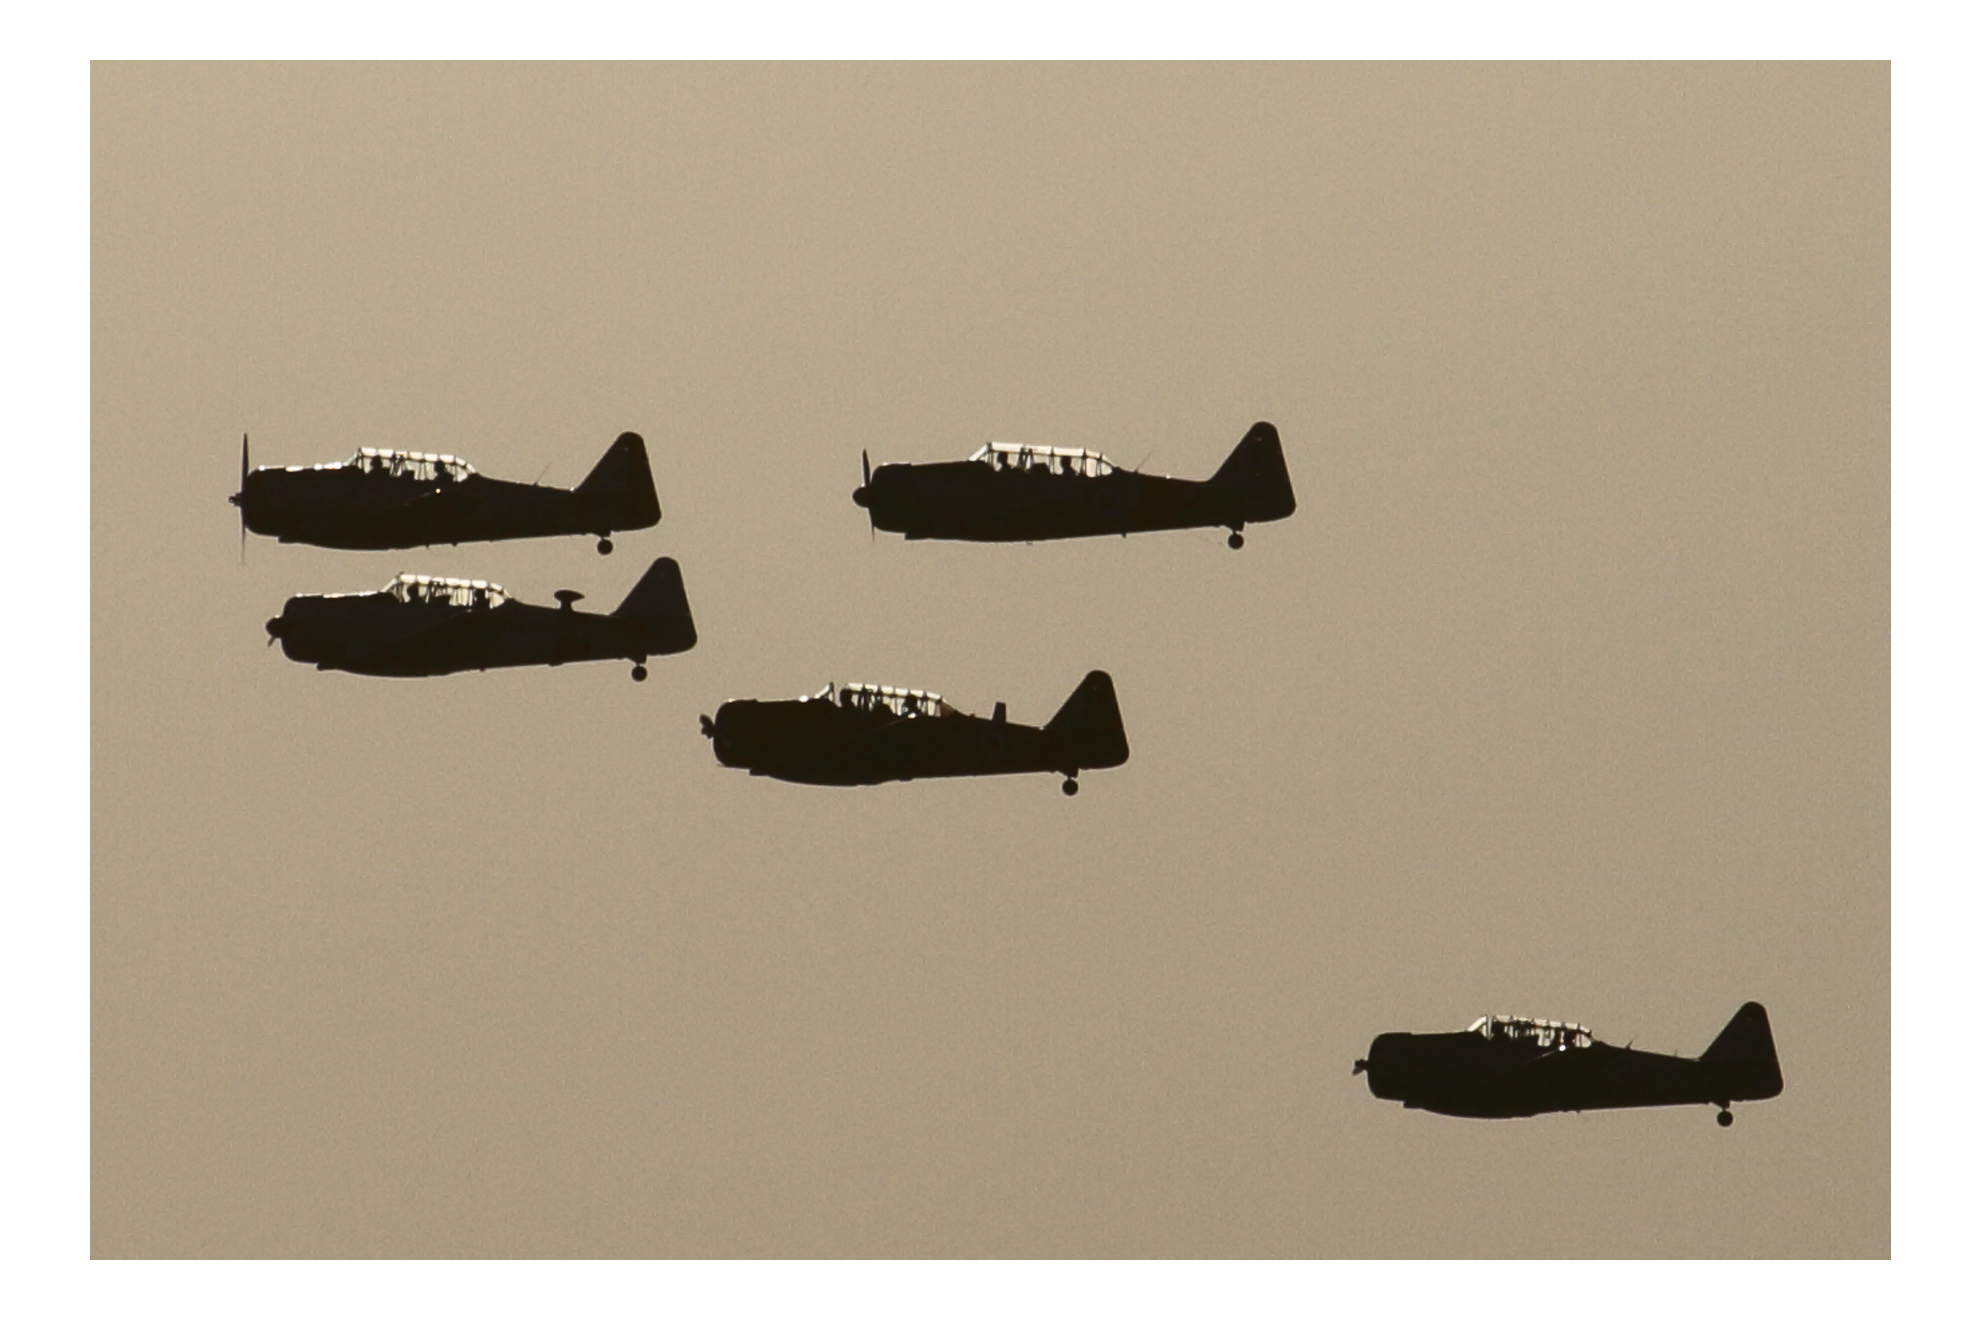 Formation of five North American T-6 Texans...